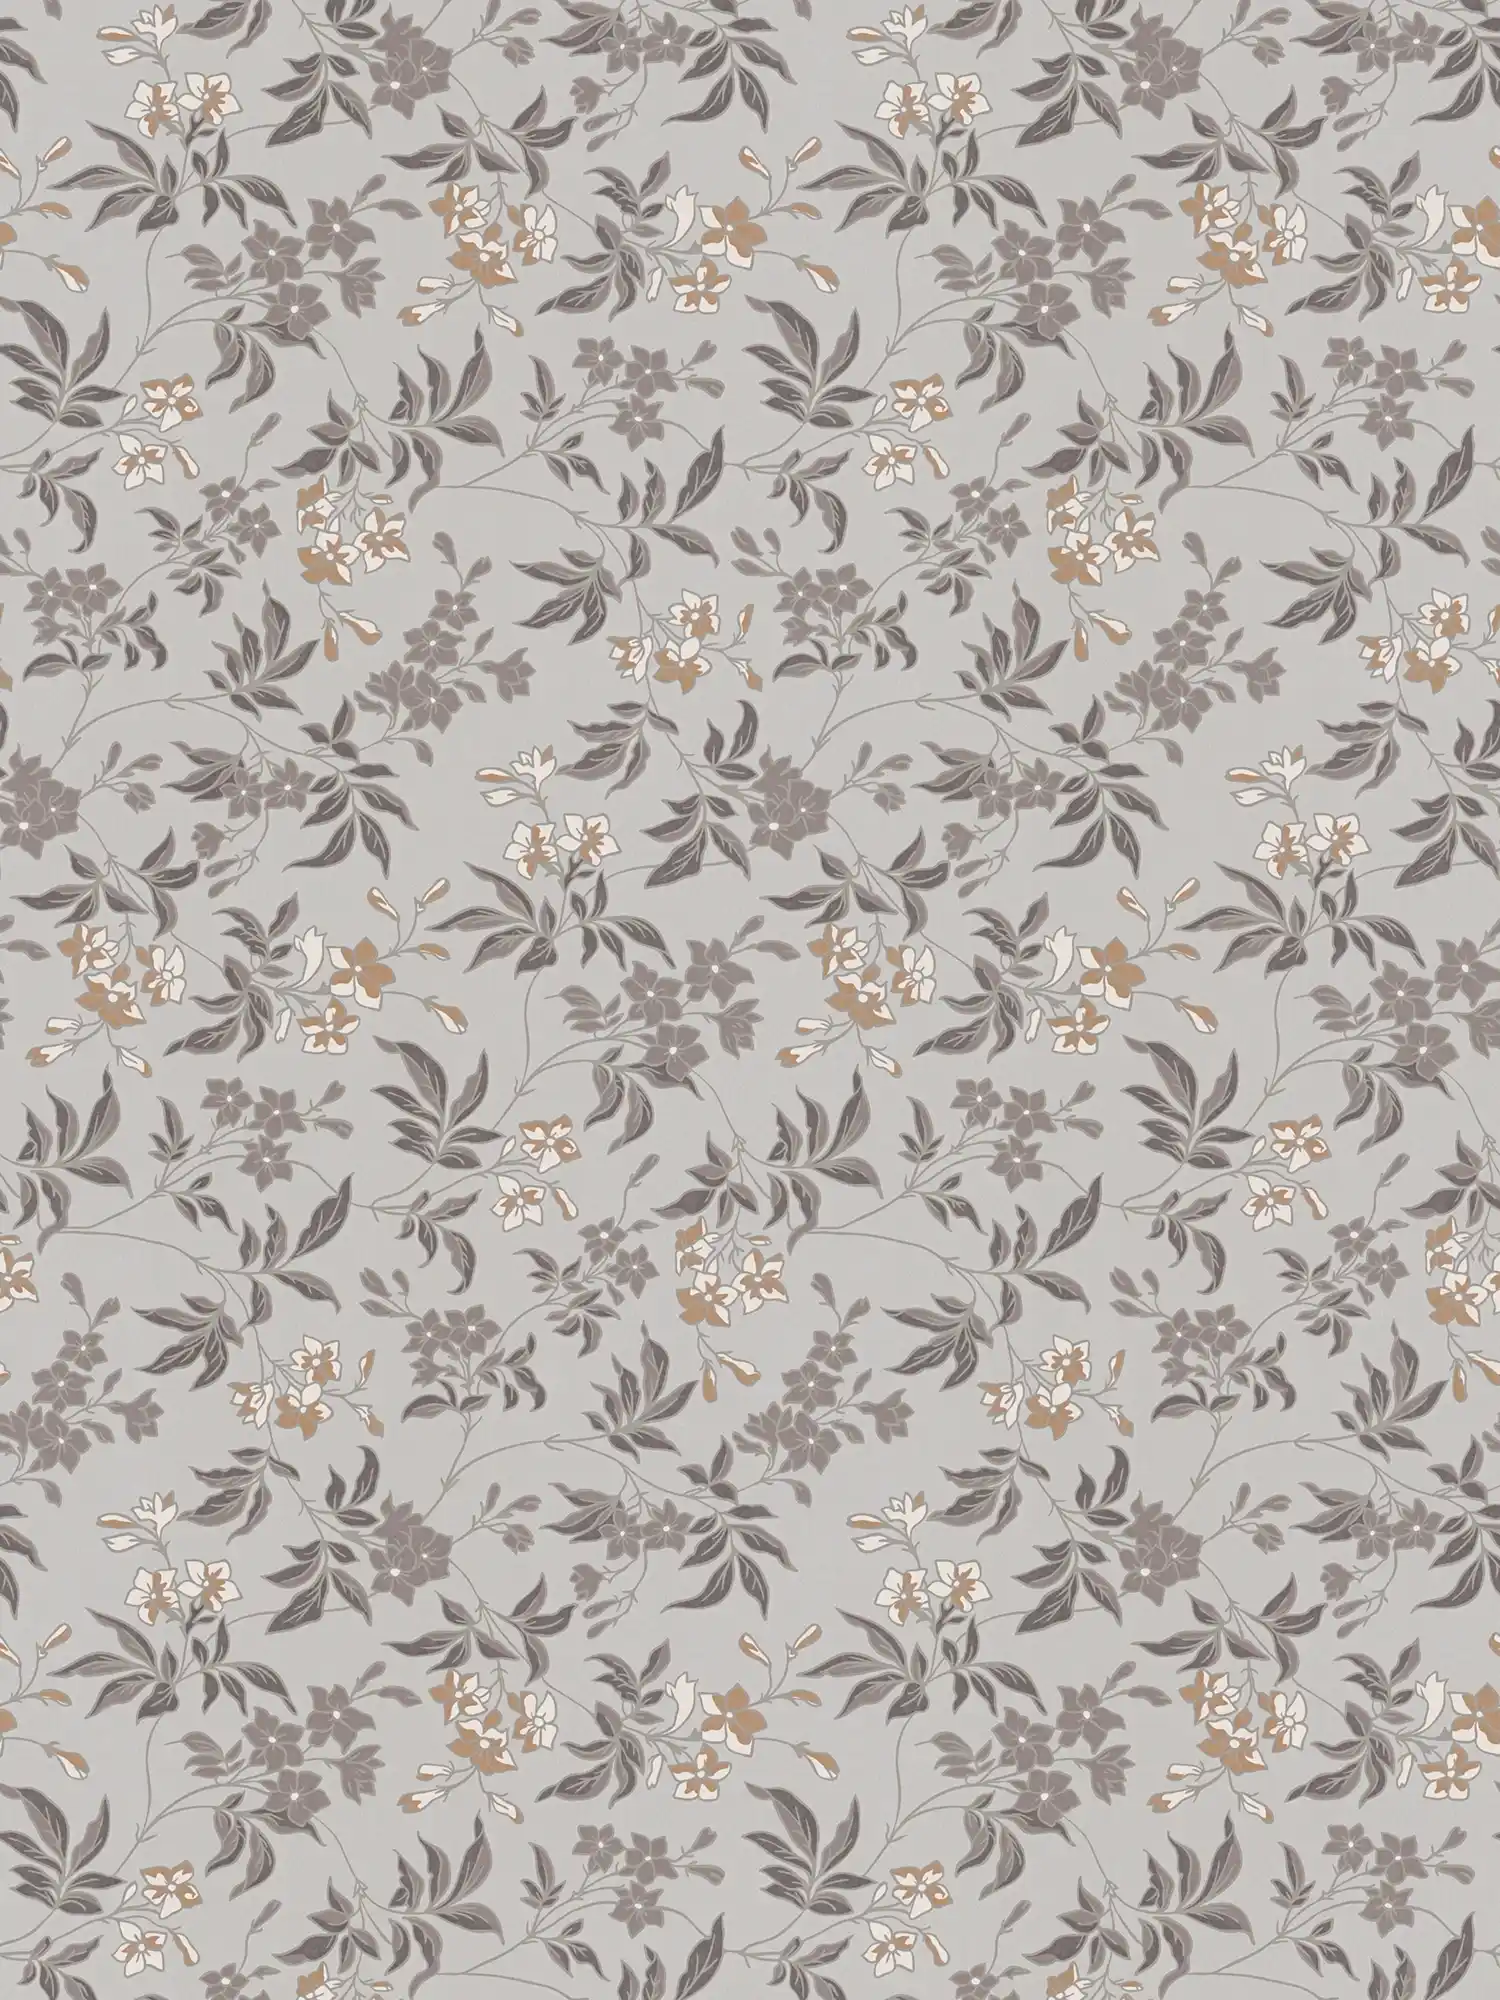 Floral pattern flowers and vines wallpaper - grey, brown, white
